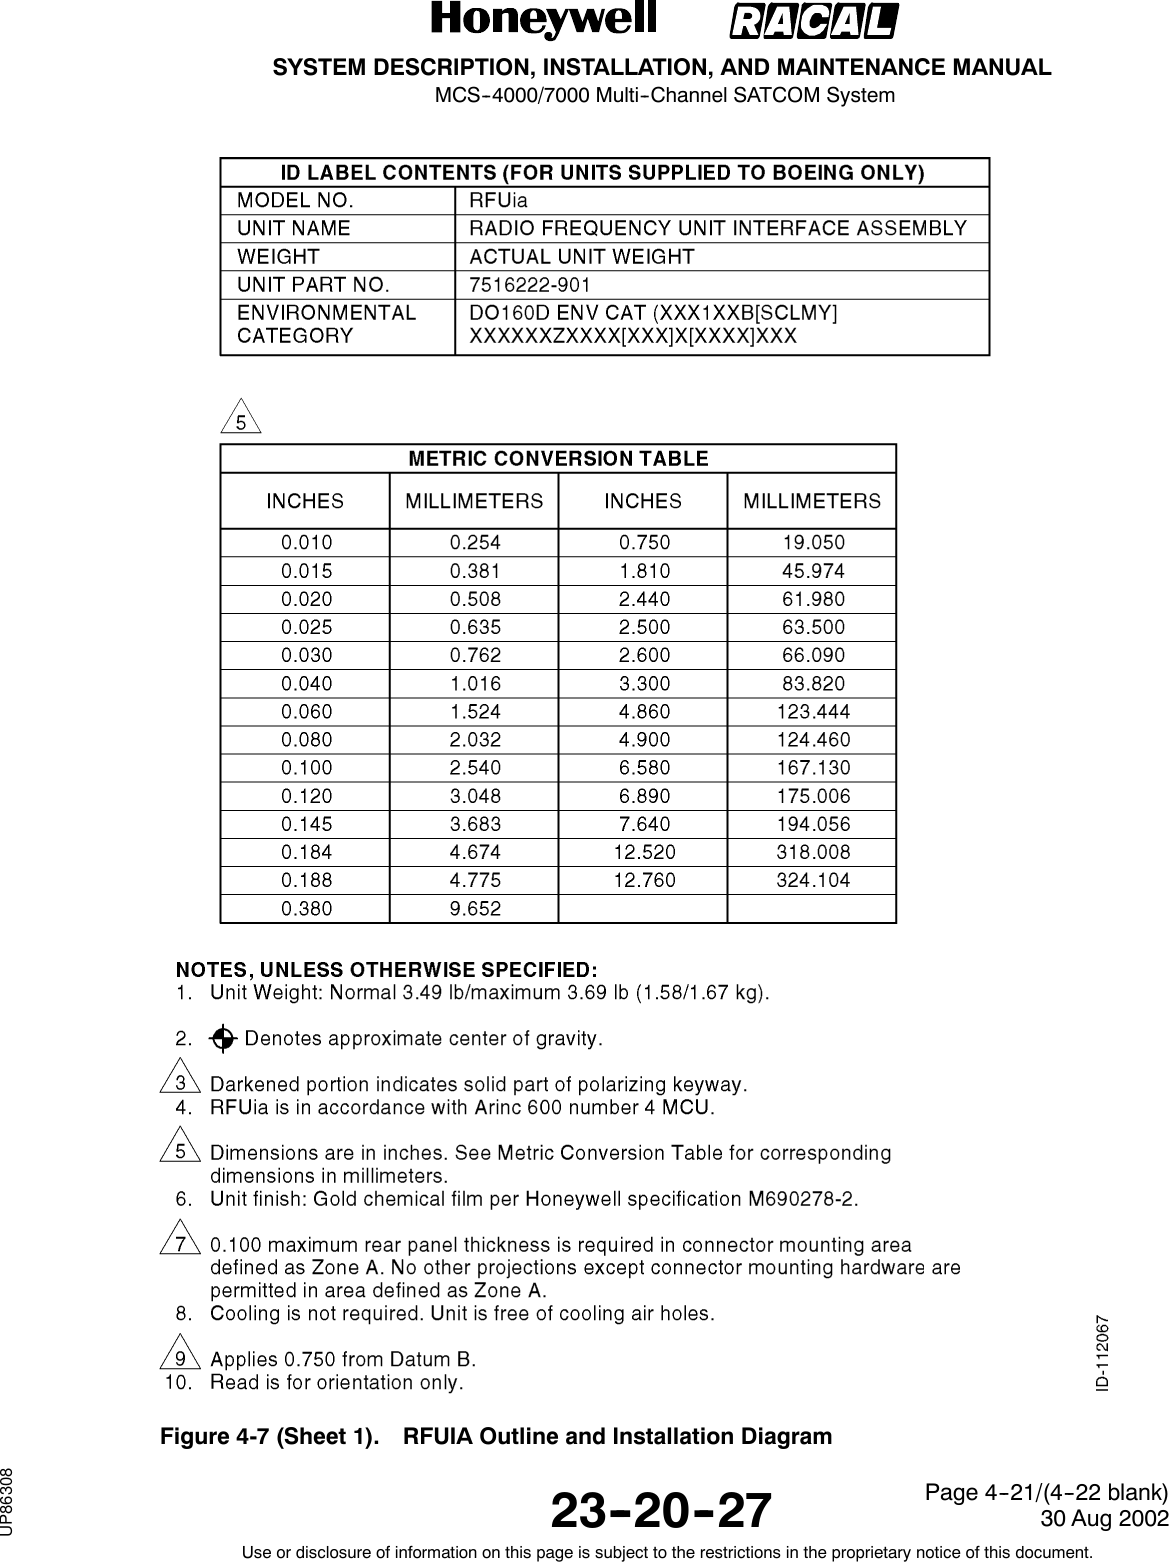 SYSTEM DESCRIPTION, INSTALLATION, AND MAINTENANCE MANUALMCS--4000/7000 Multi--Channel SATCOM System23--20--2730 Aug 2002Use or disclosure of information on this page is subject to the restrictions in the proprietary notice of this document.Page 4--21/(4--22 blank)Figure 4-7 (Sheet 1). RFUIA Outline and Installation DiagramRELEASED FOR THE EXCLUSIVE USE BY: HONEYWELL INTERNATIONALUP86308